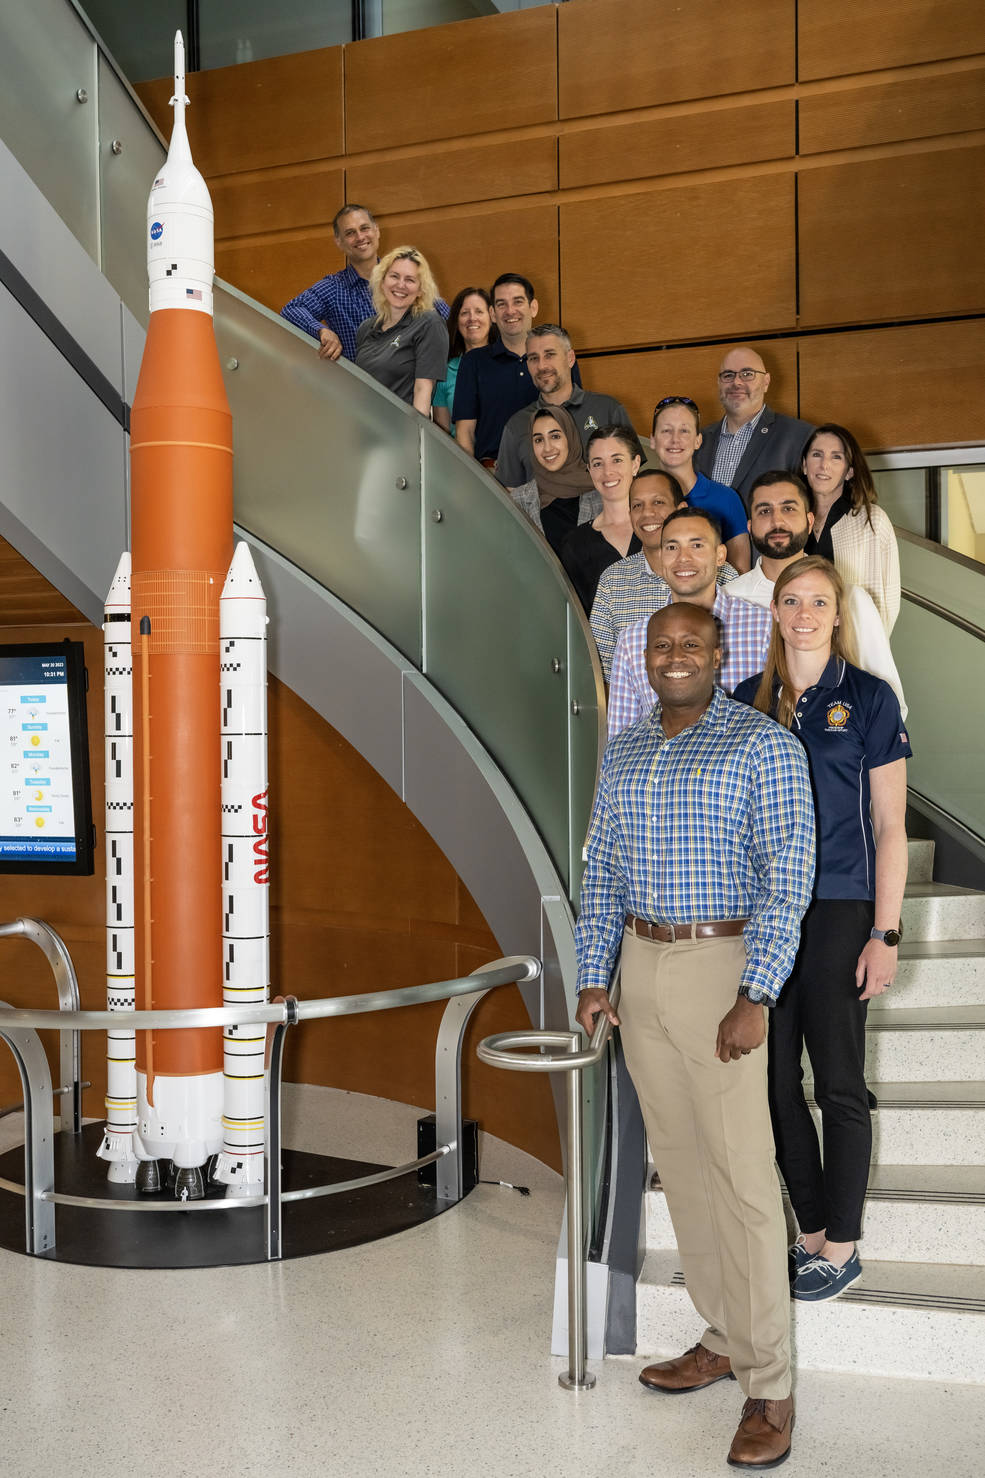 NASAs 2021 astronaut candidates class took a group photo during their visit to Marshall Space Flight Center on May 24 with senior leaders in Building 4221.